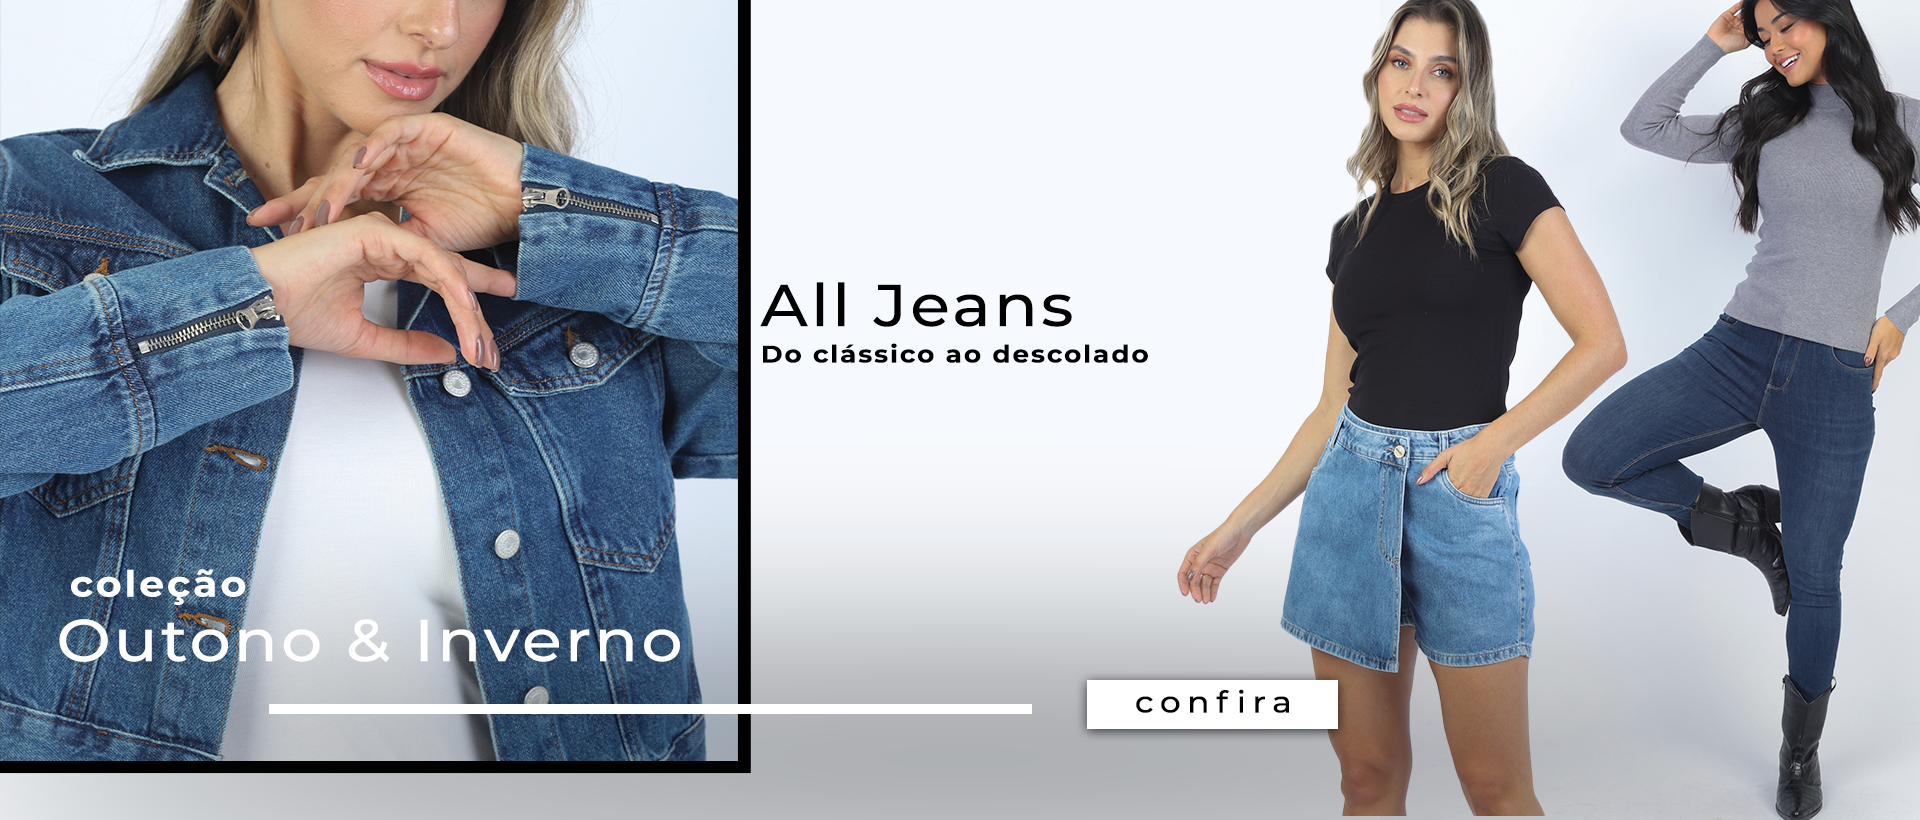 Banner 01- Jeans